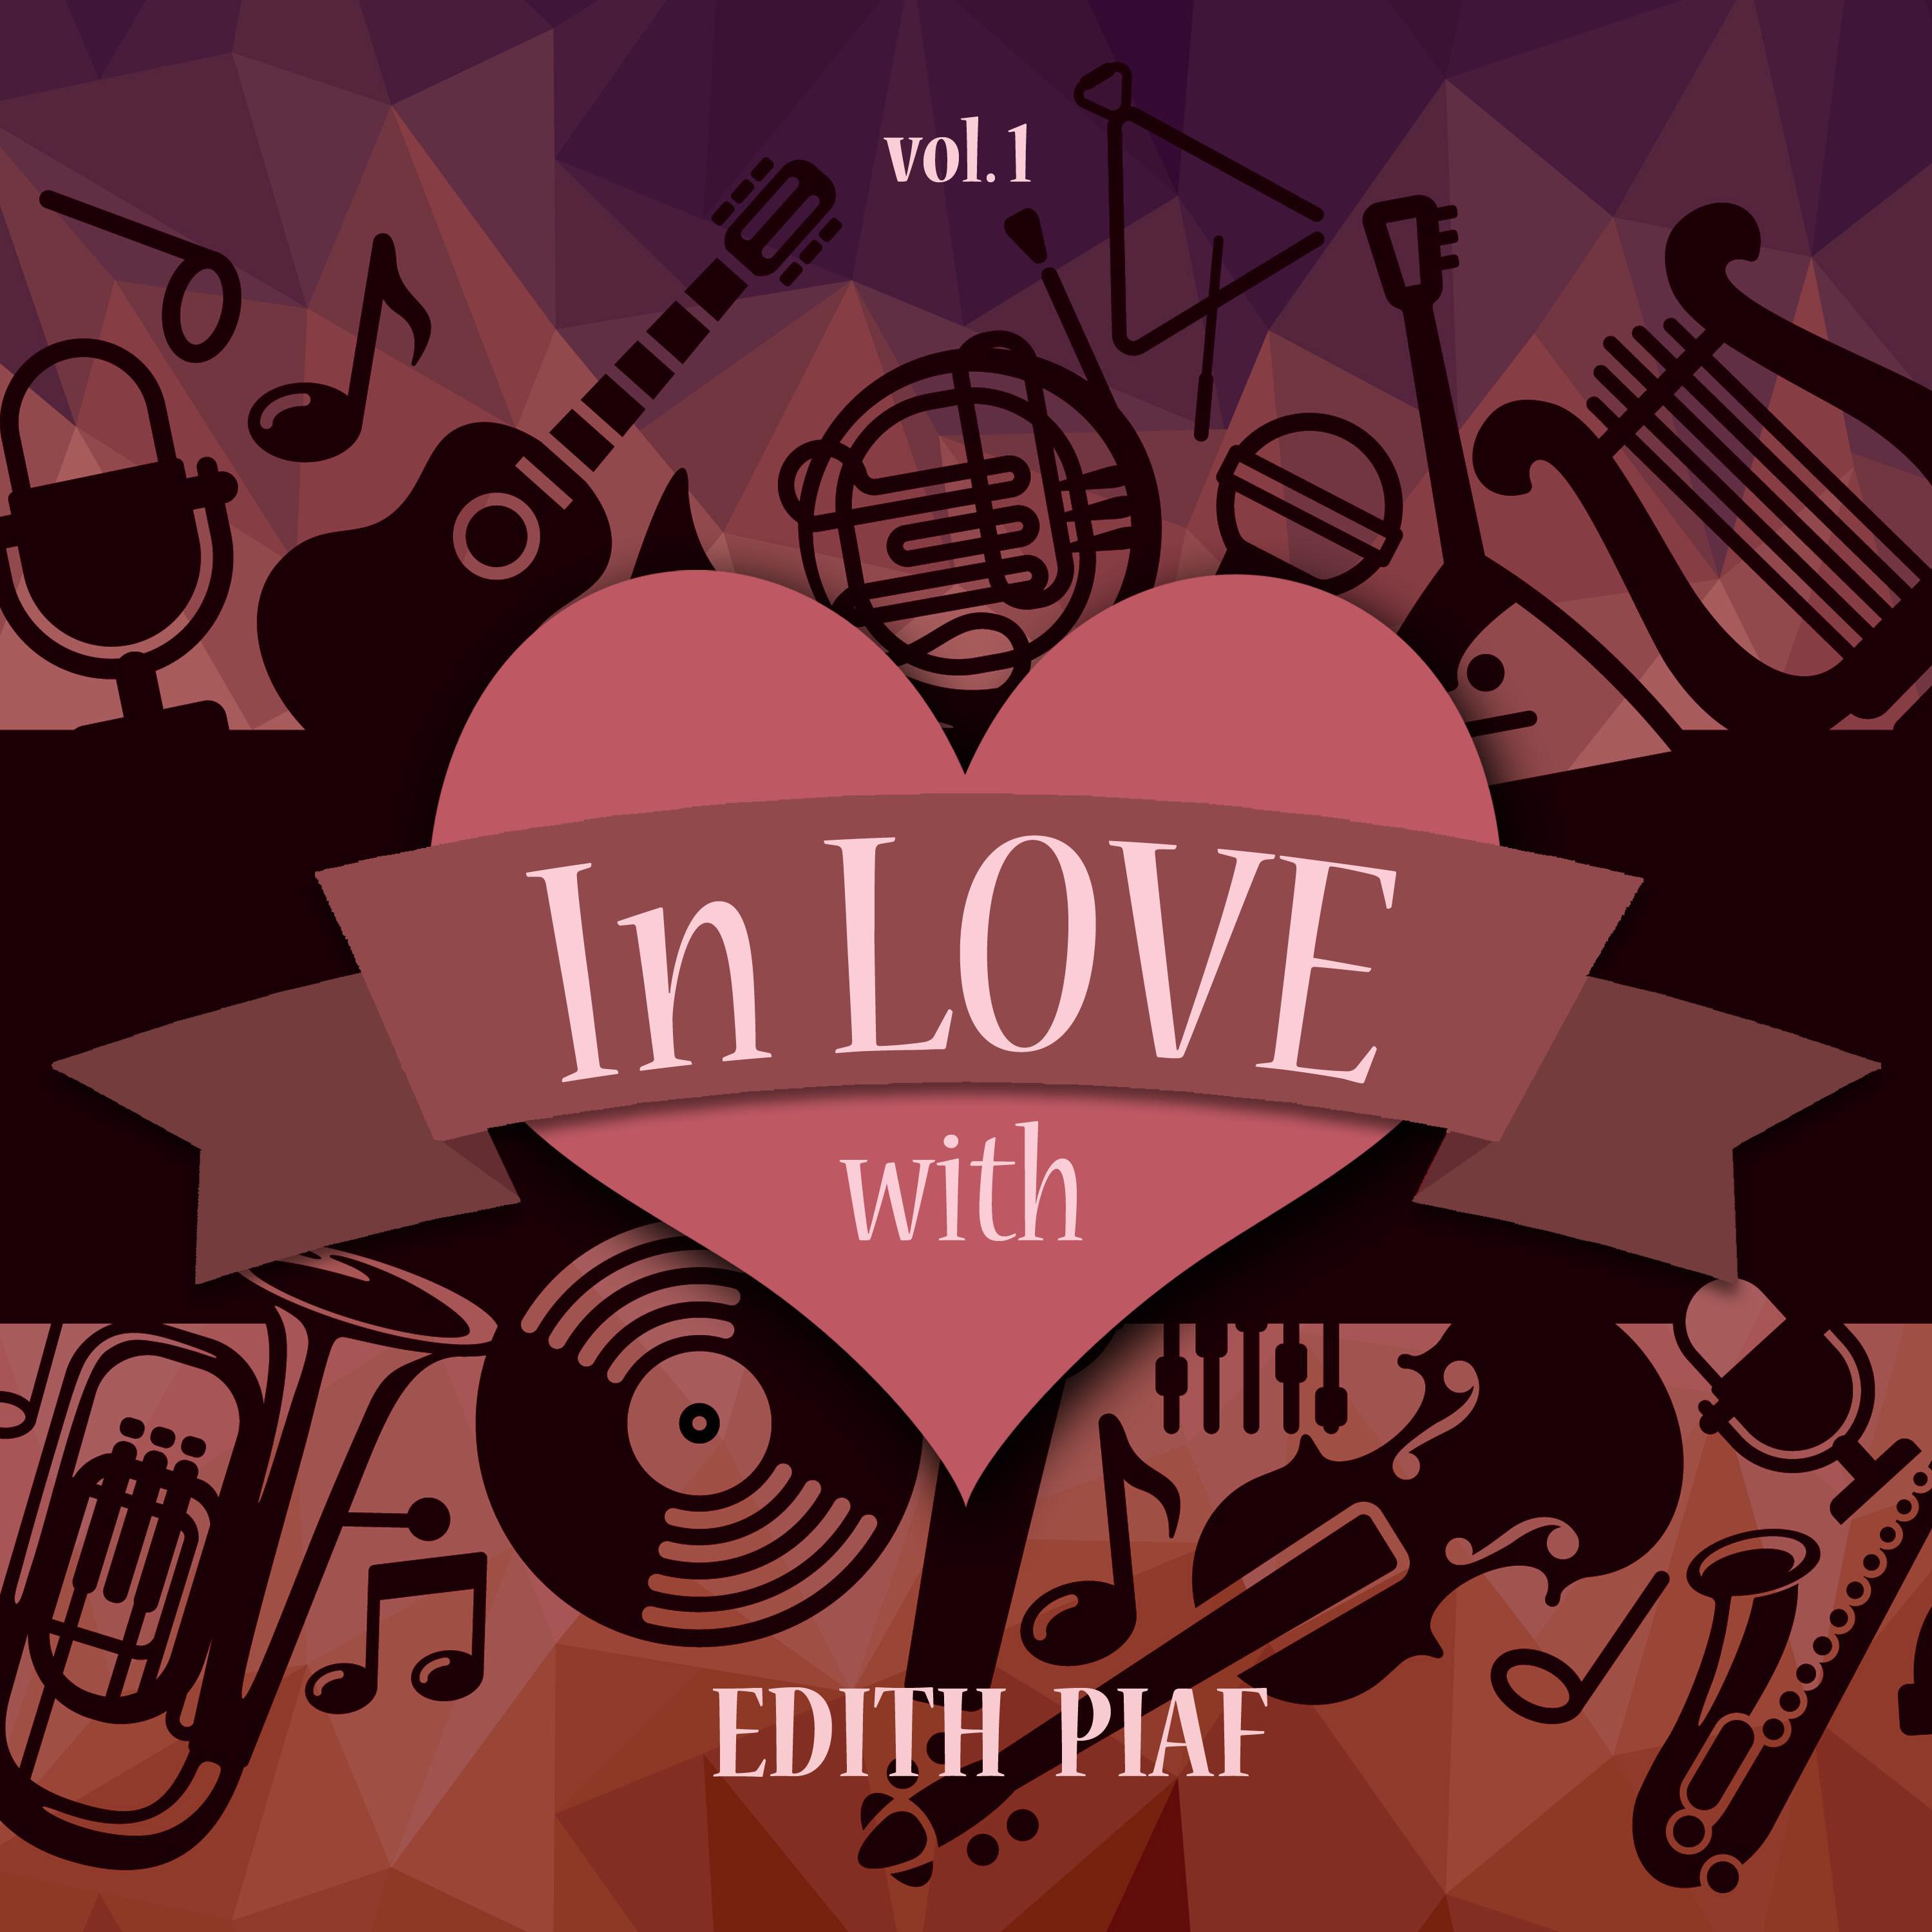 In Love with Edith Piaf, Vol. 1